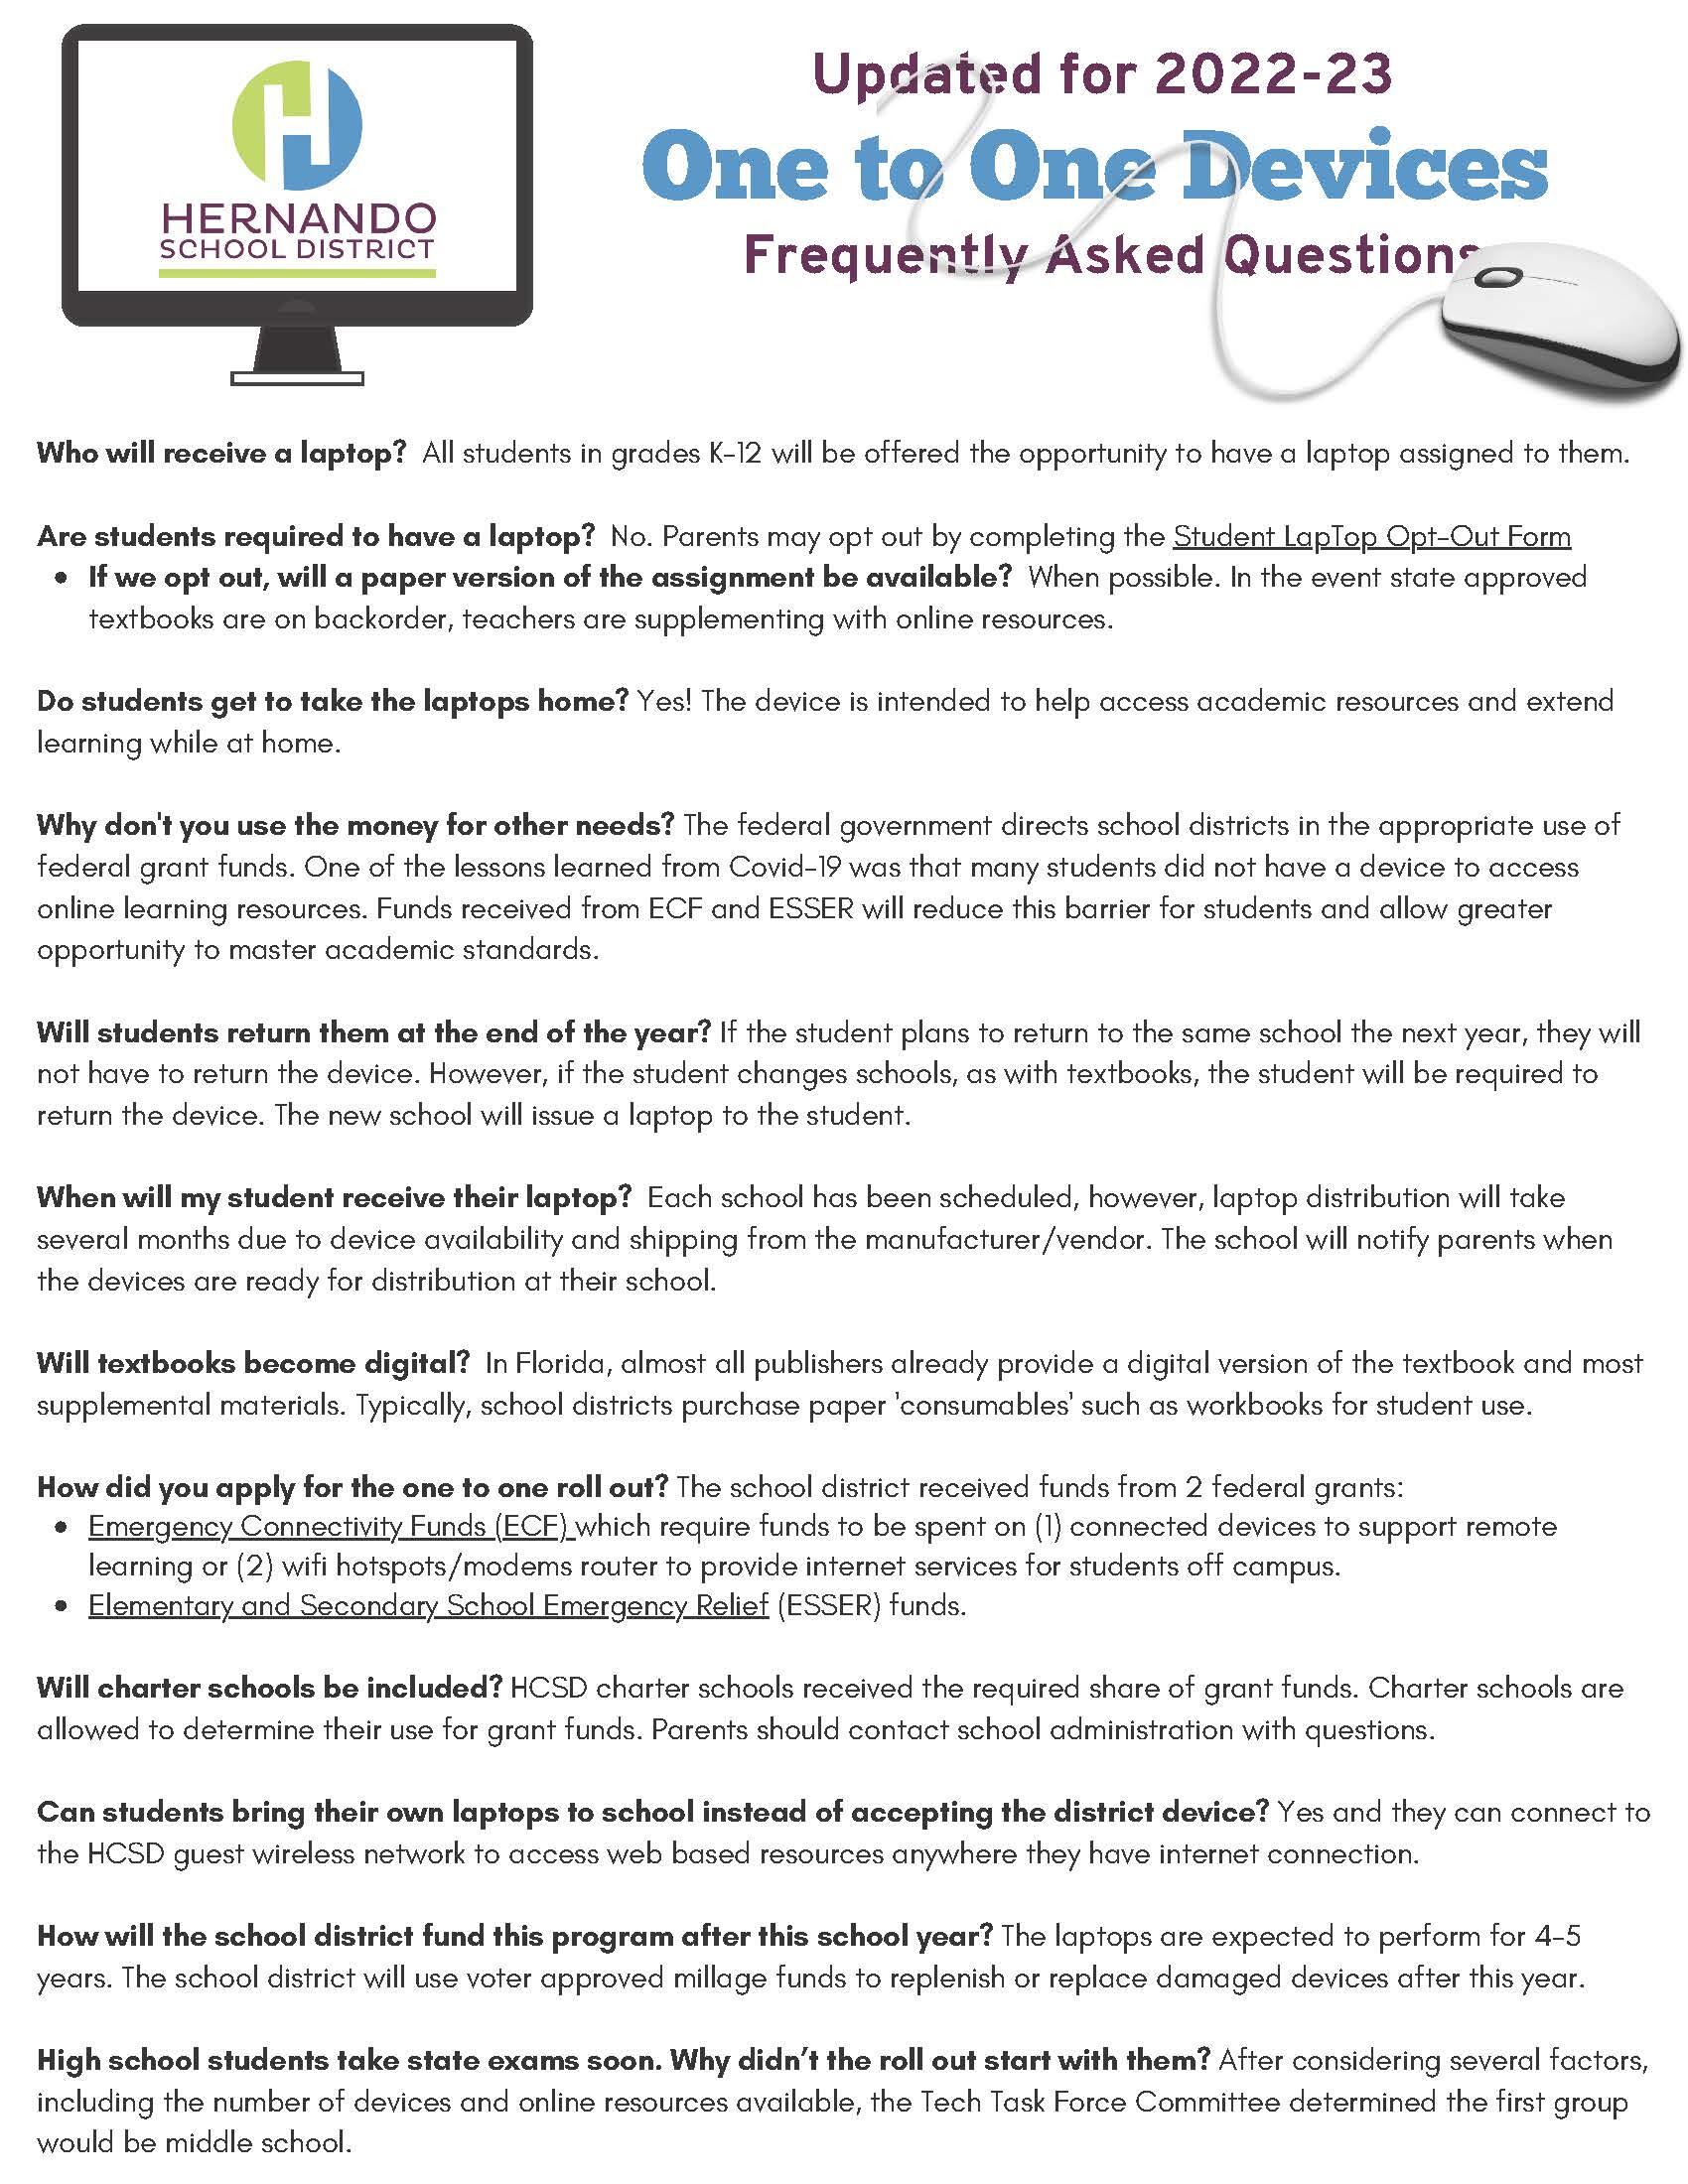 One to One Devices FAQs - Page 3